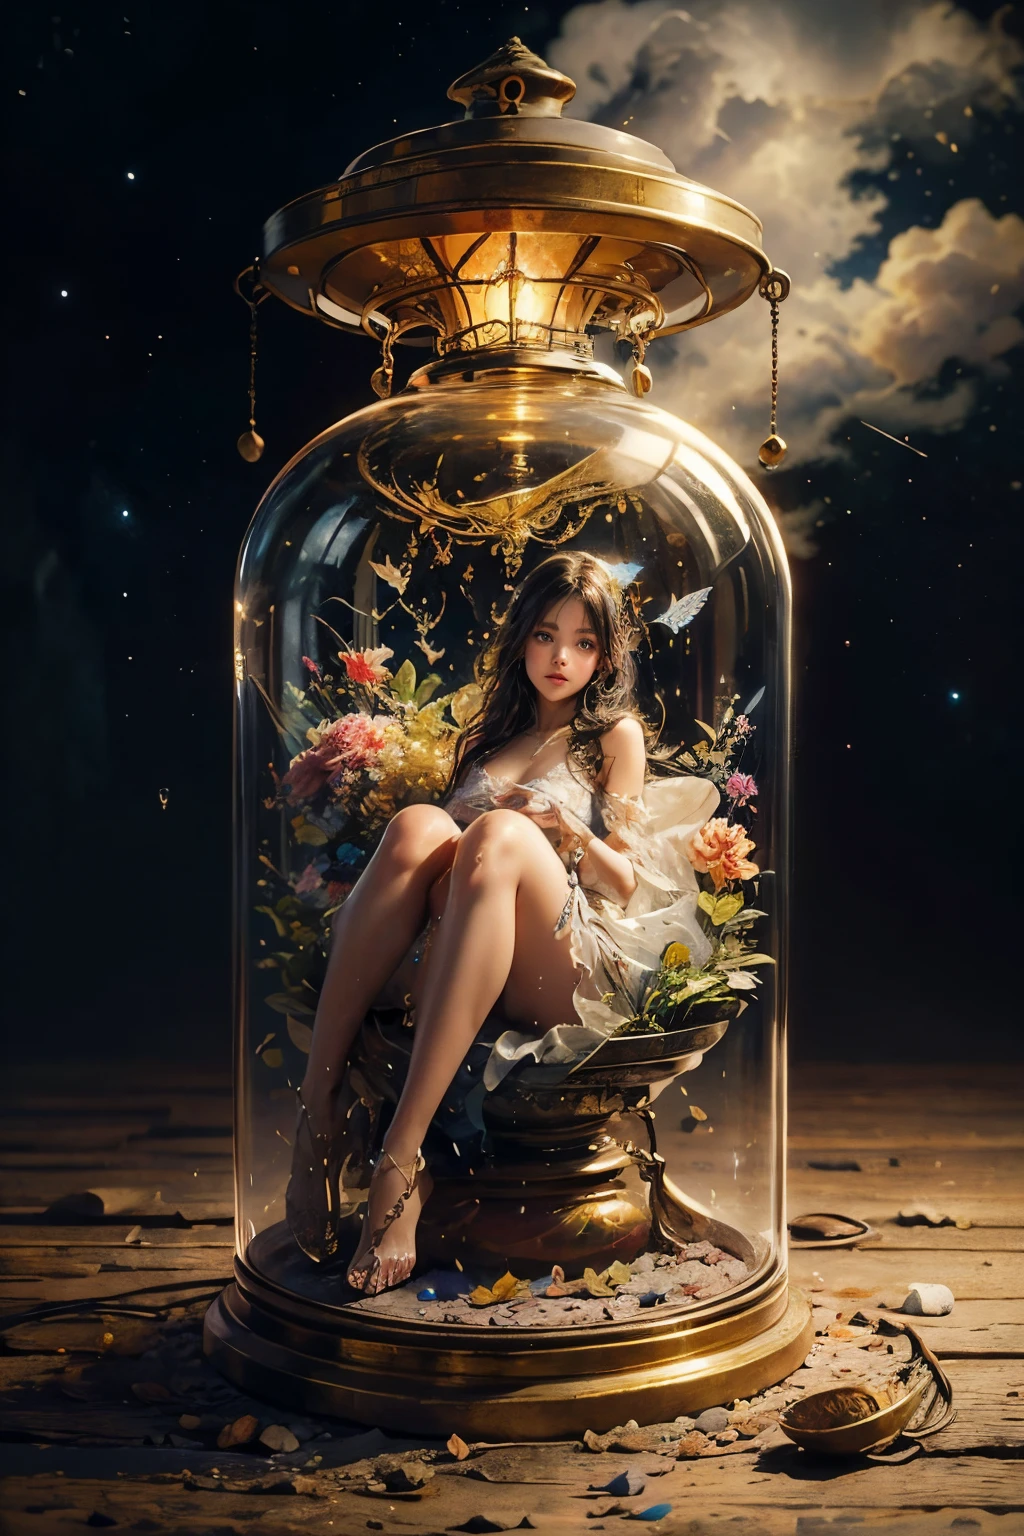 (masterpiece), best quality, expressive eyes, perfect face, huge hourglass, antique hourglass, floating antique clock, beautiful girl inside the hourglass, beautiful Latin girl behind the clock glass, floating antique clock, lamp , lantern, dark night sky, cloudy sky, rain clouds with lightning, beautiful girl looking up, long black hair, dark, high resolution, 8k, beautiful latin girl face, cool beauty, transparent white silk dress, style beauty, bright fog. Paint water splashes. Magic spell. Baroque elements, intricate oil paintings, swirling bubbles and fountains, full body, extremely detailed (Fractal Art: 1.3), colorful, more detailed, slight smile, sitting on stool with legs spread, view of pubic hair, 1 sexy girl in clothes transparent, small breasts exposed, transparent open t-shirt, tattoos of mandalas and flowers, best quality, black and brown hair merged in water, naked girl, beautiful visible pubic area, small breasts in sight, perfect hair, perfect full lips, body delicate and perfect, digital painting, intricately detailed eyes looking up, girl looking up, metallic colors and enamel, fine art, finely drawn hands; magical garden, metallic roses, autumn leaves, metallic colors and enamel, meditation, girl in a state of meditation, rain, wlop style art, Latin girl with tanned skin, shiny brown skin, bare feet stepping on garden grass, scene inside glass hourglass, floating antique clocks, impressionist art,